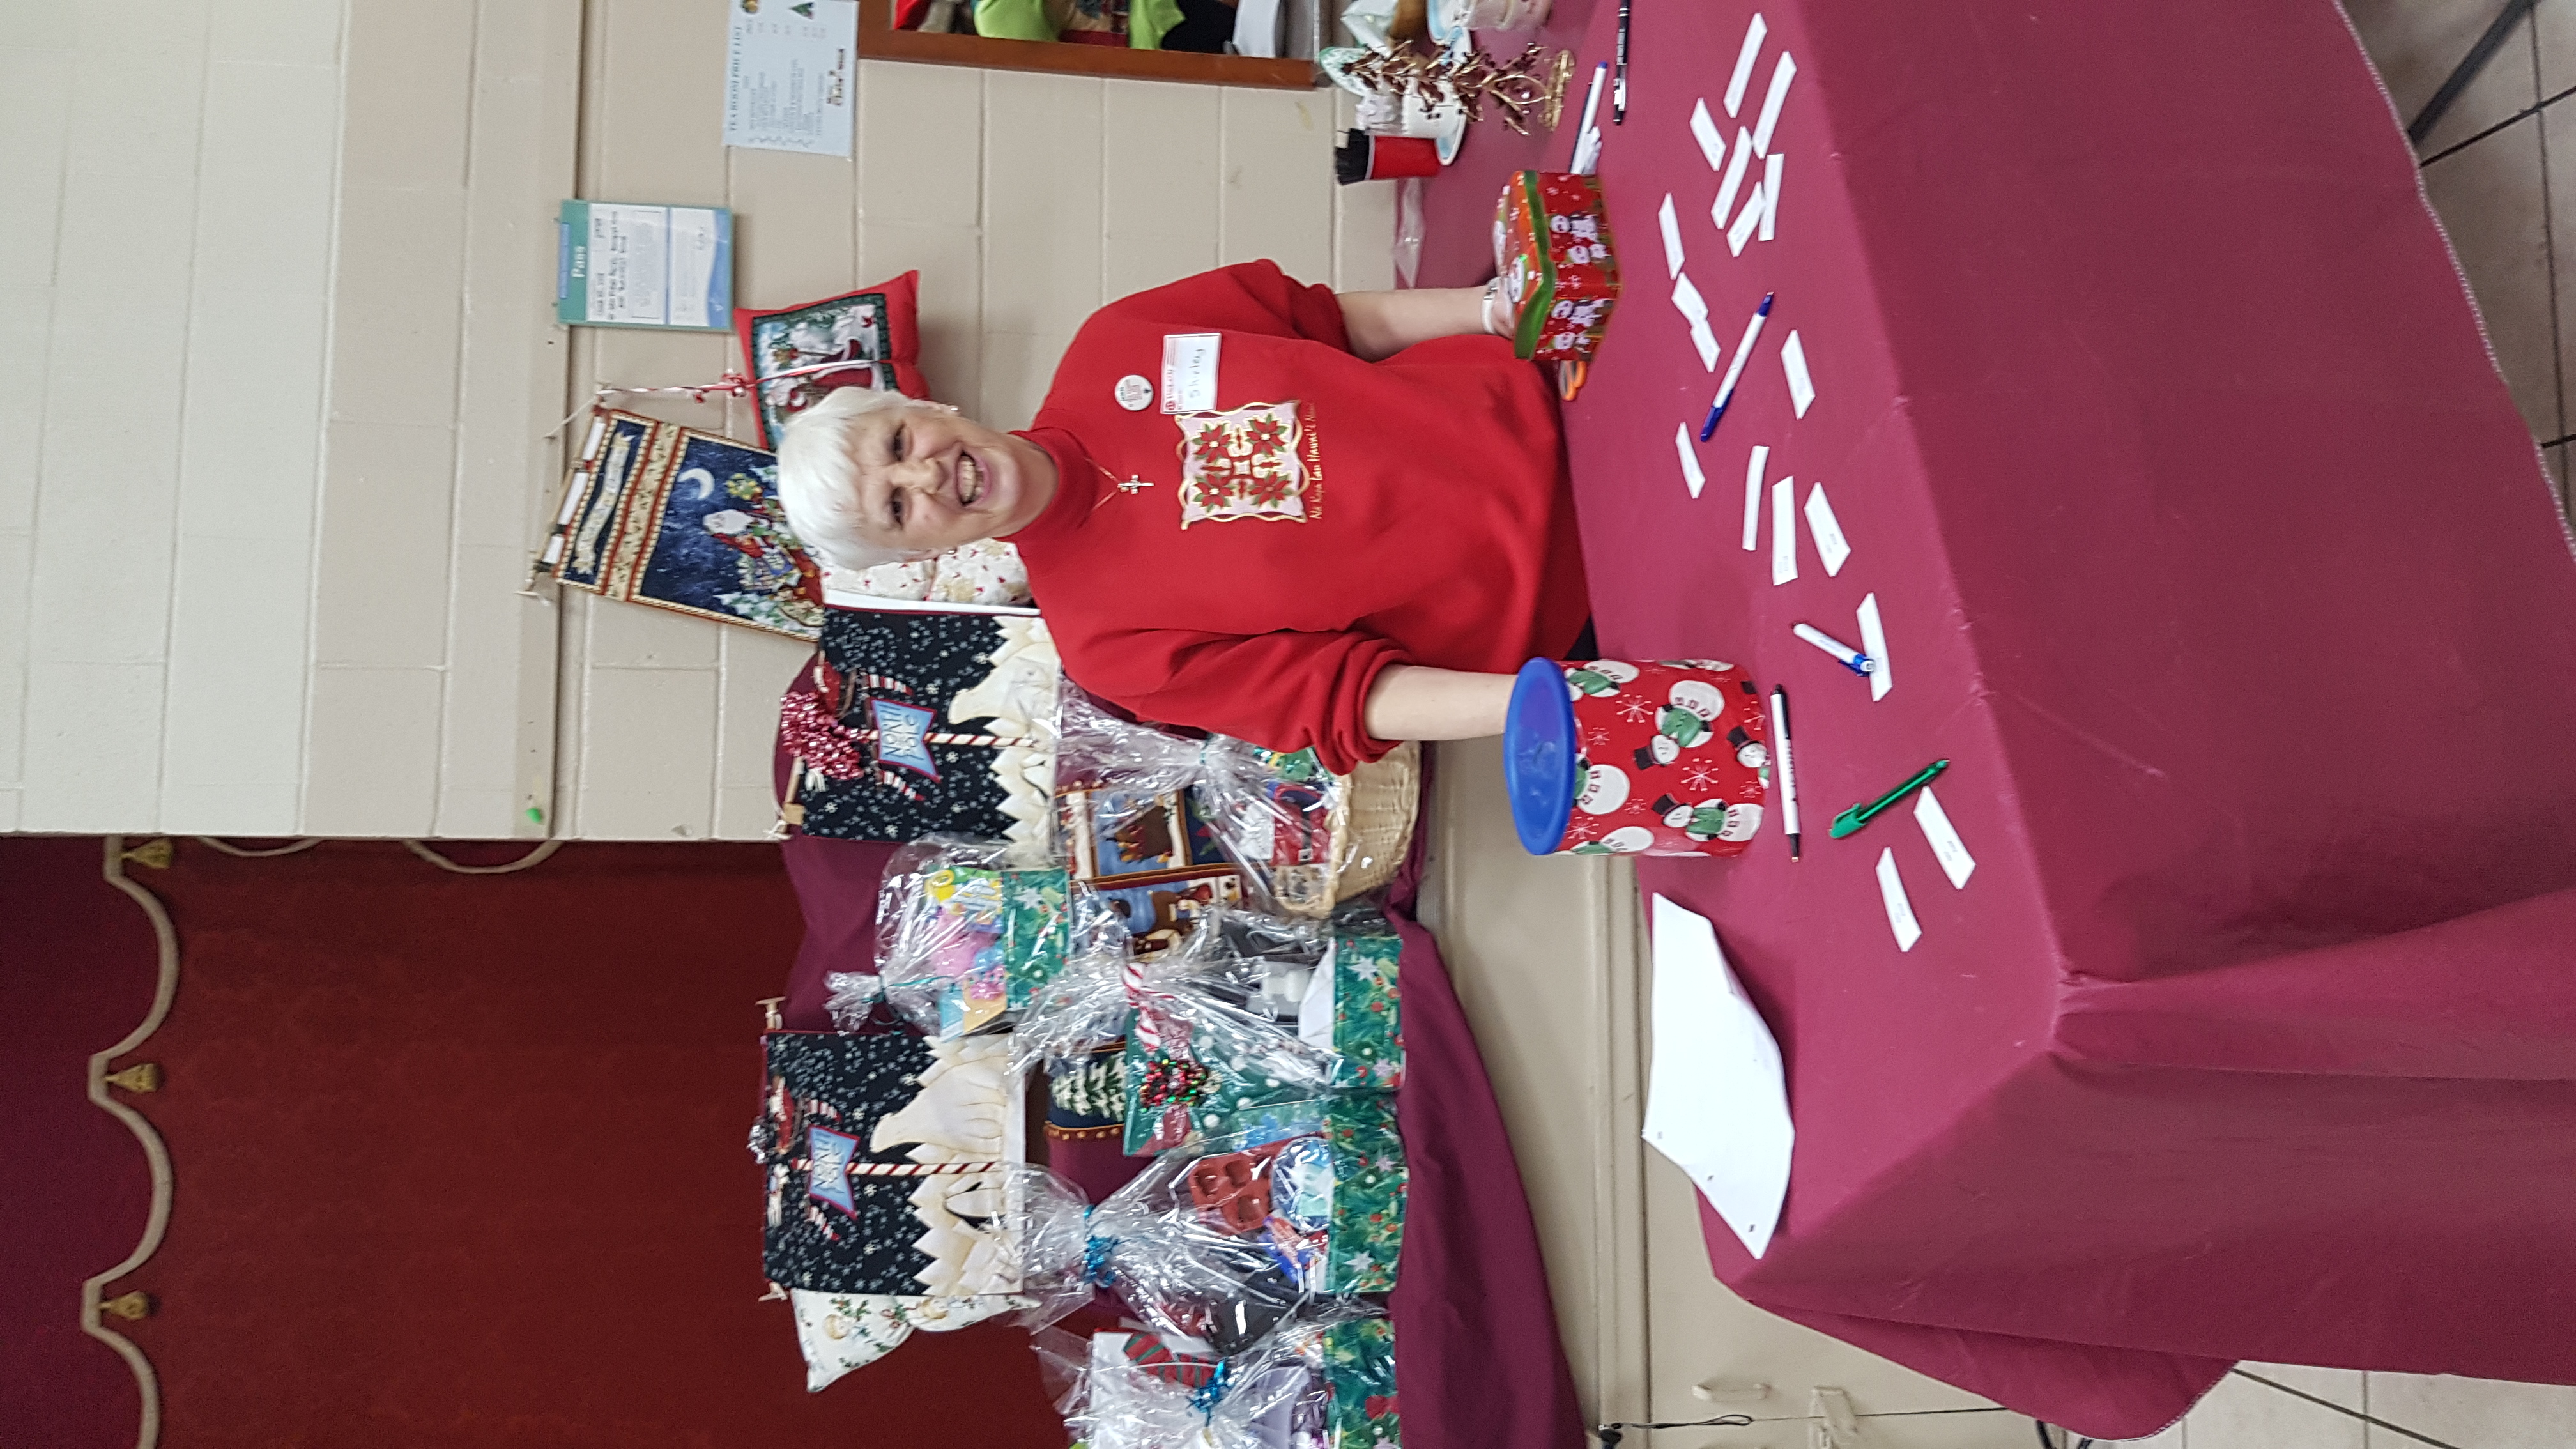 picture of Shirley selling raffle tickets for baskets